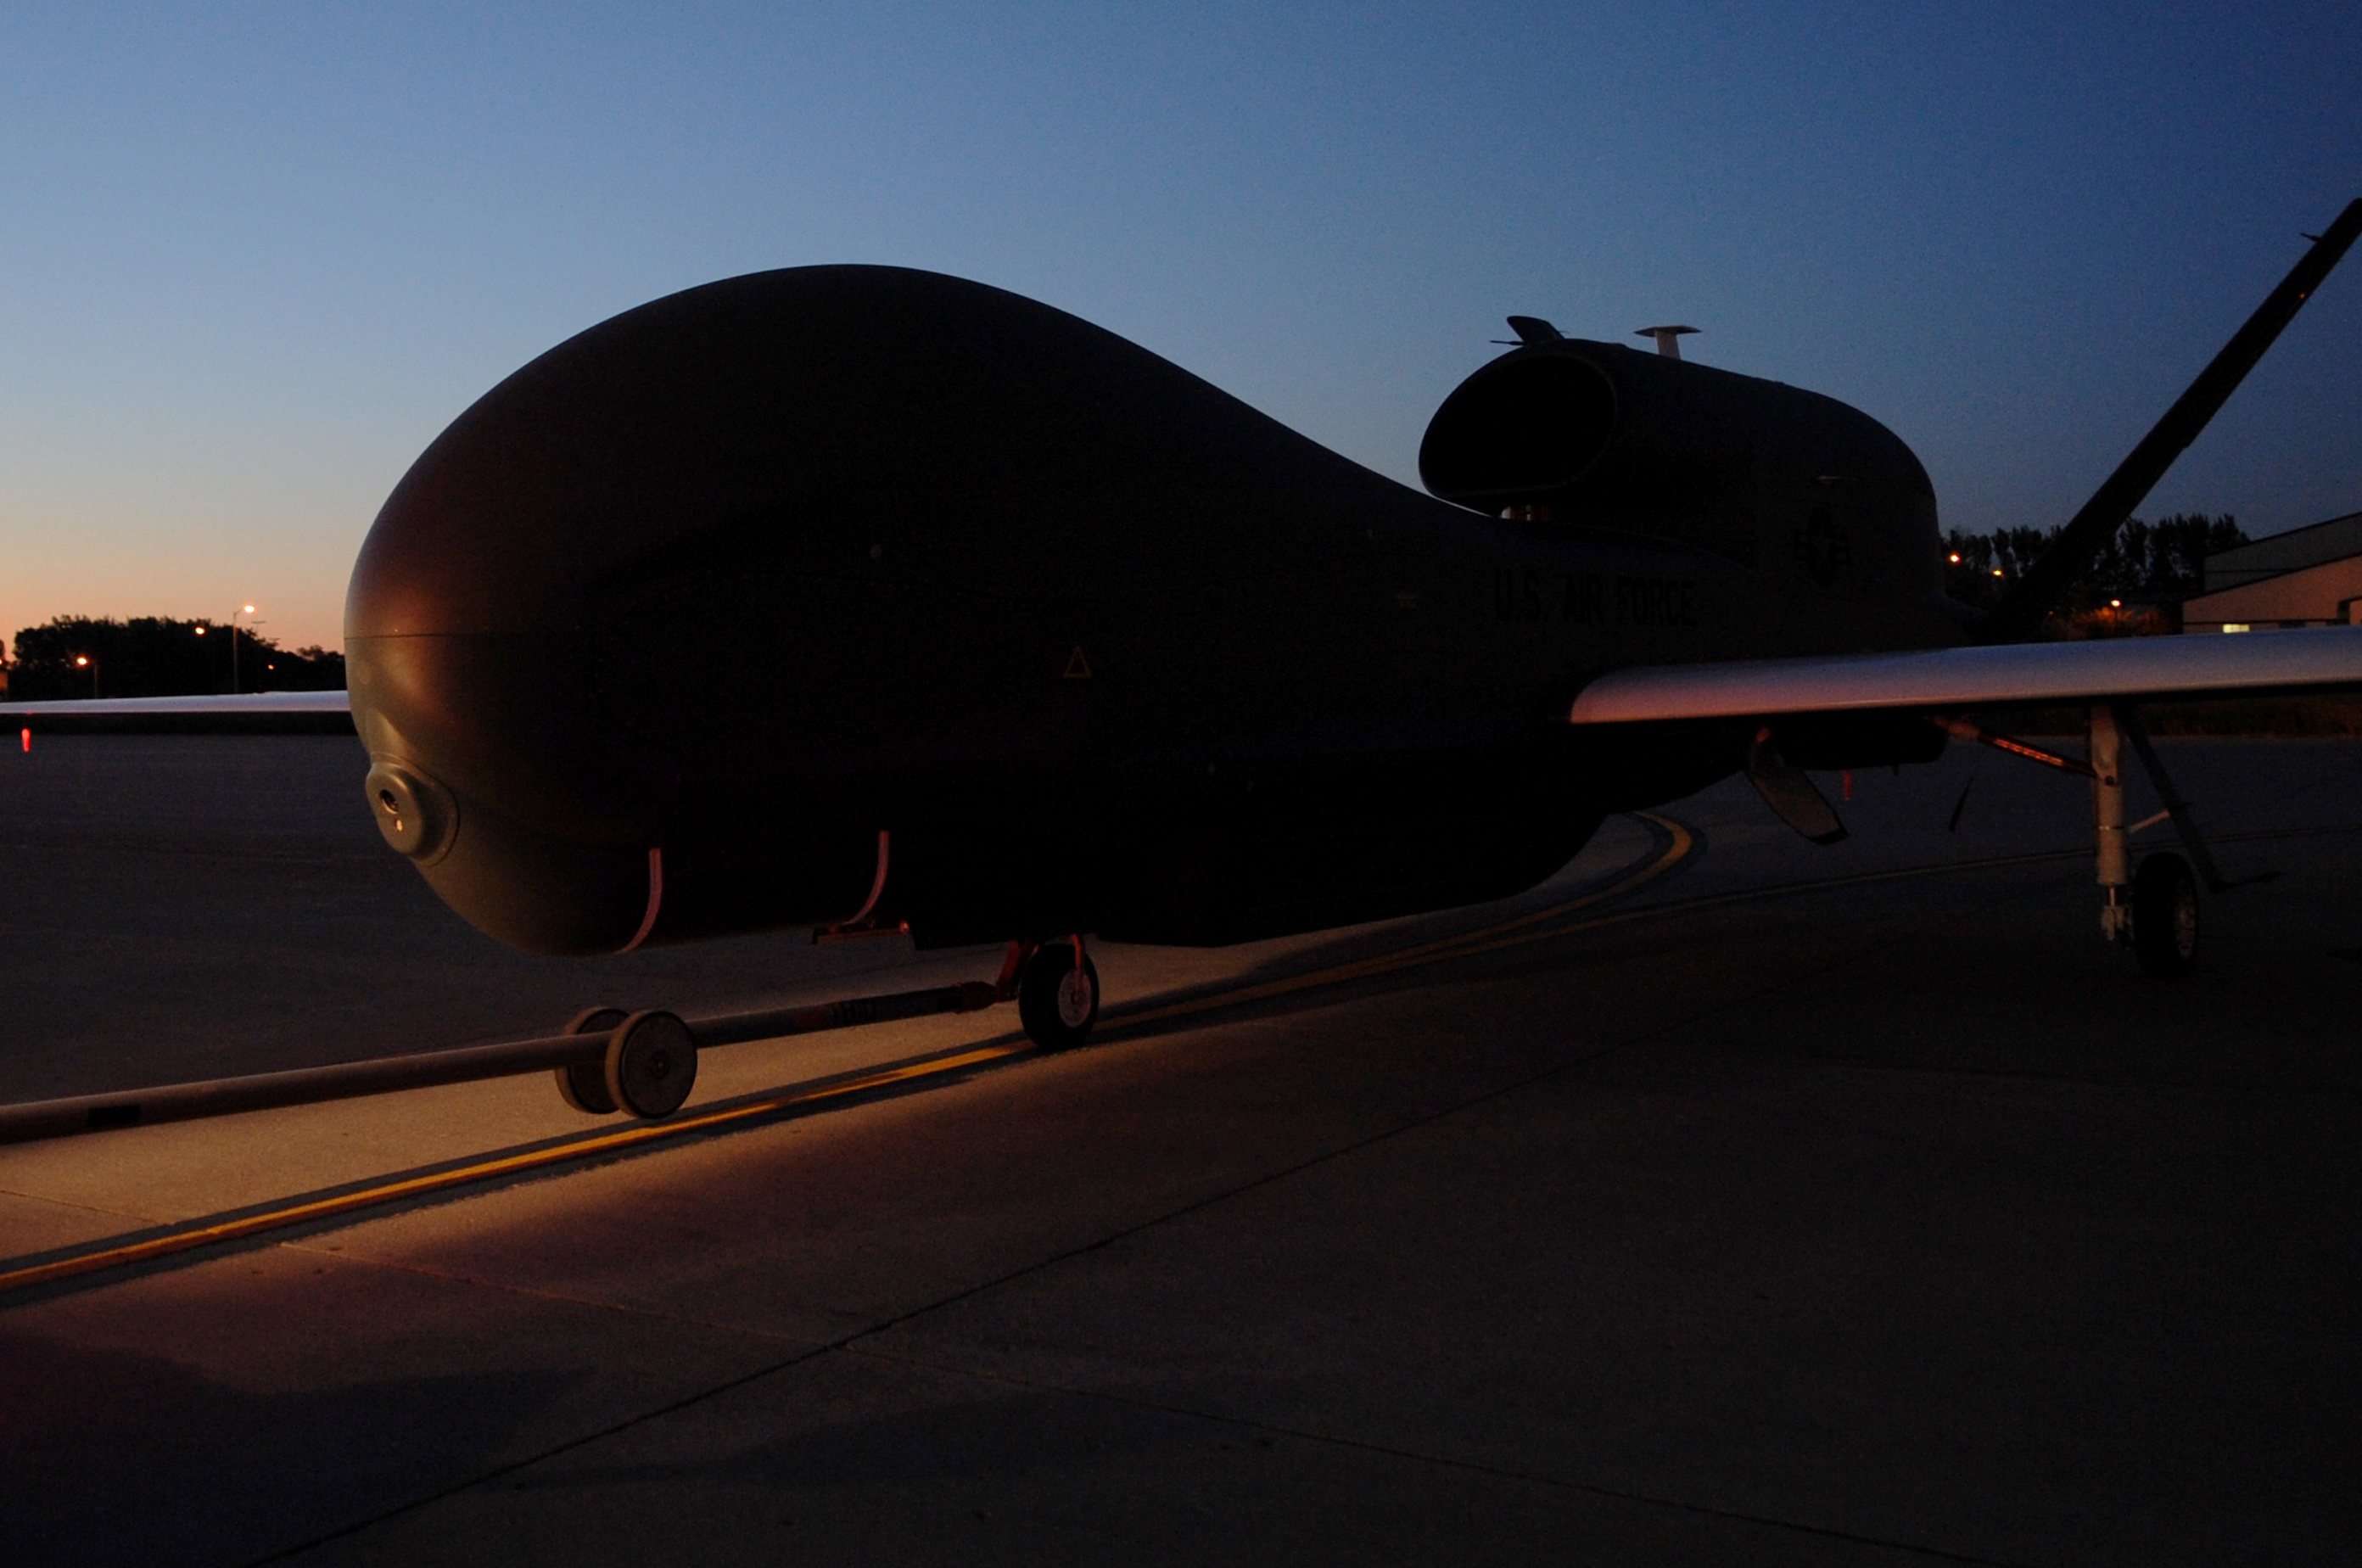 RQ-4 Global Hawk unmanned aircraft reconnaissance system is moved on the flight line on Grand Forks by US Air Force